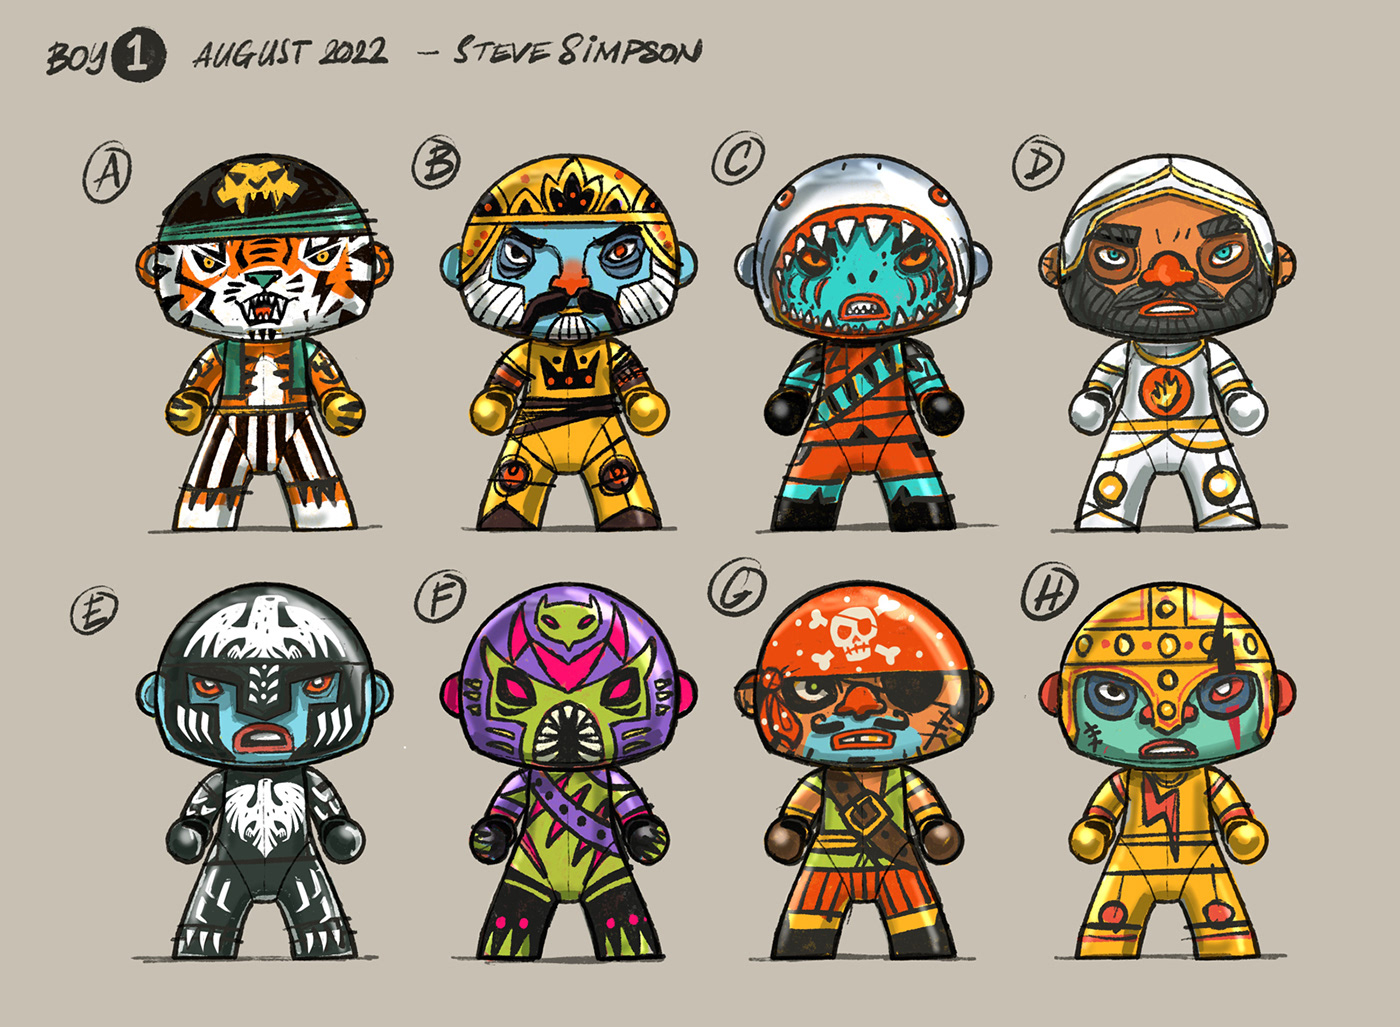 toy design  characters Fun toys figures steve simpson illustratated